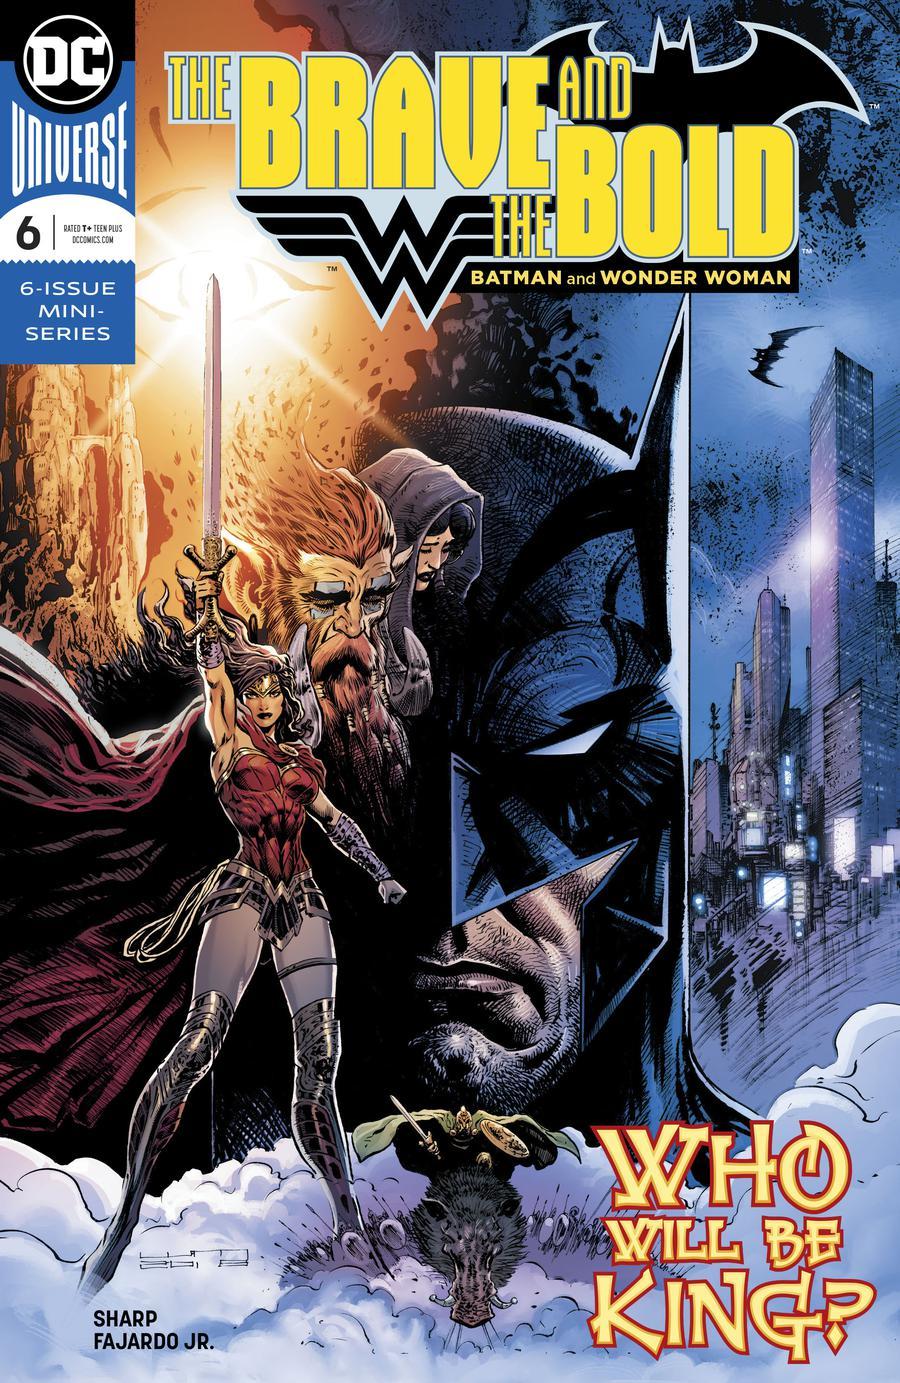 Brave And The Bold Batman And Wonder Woman Vol. 1 #6